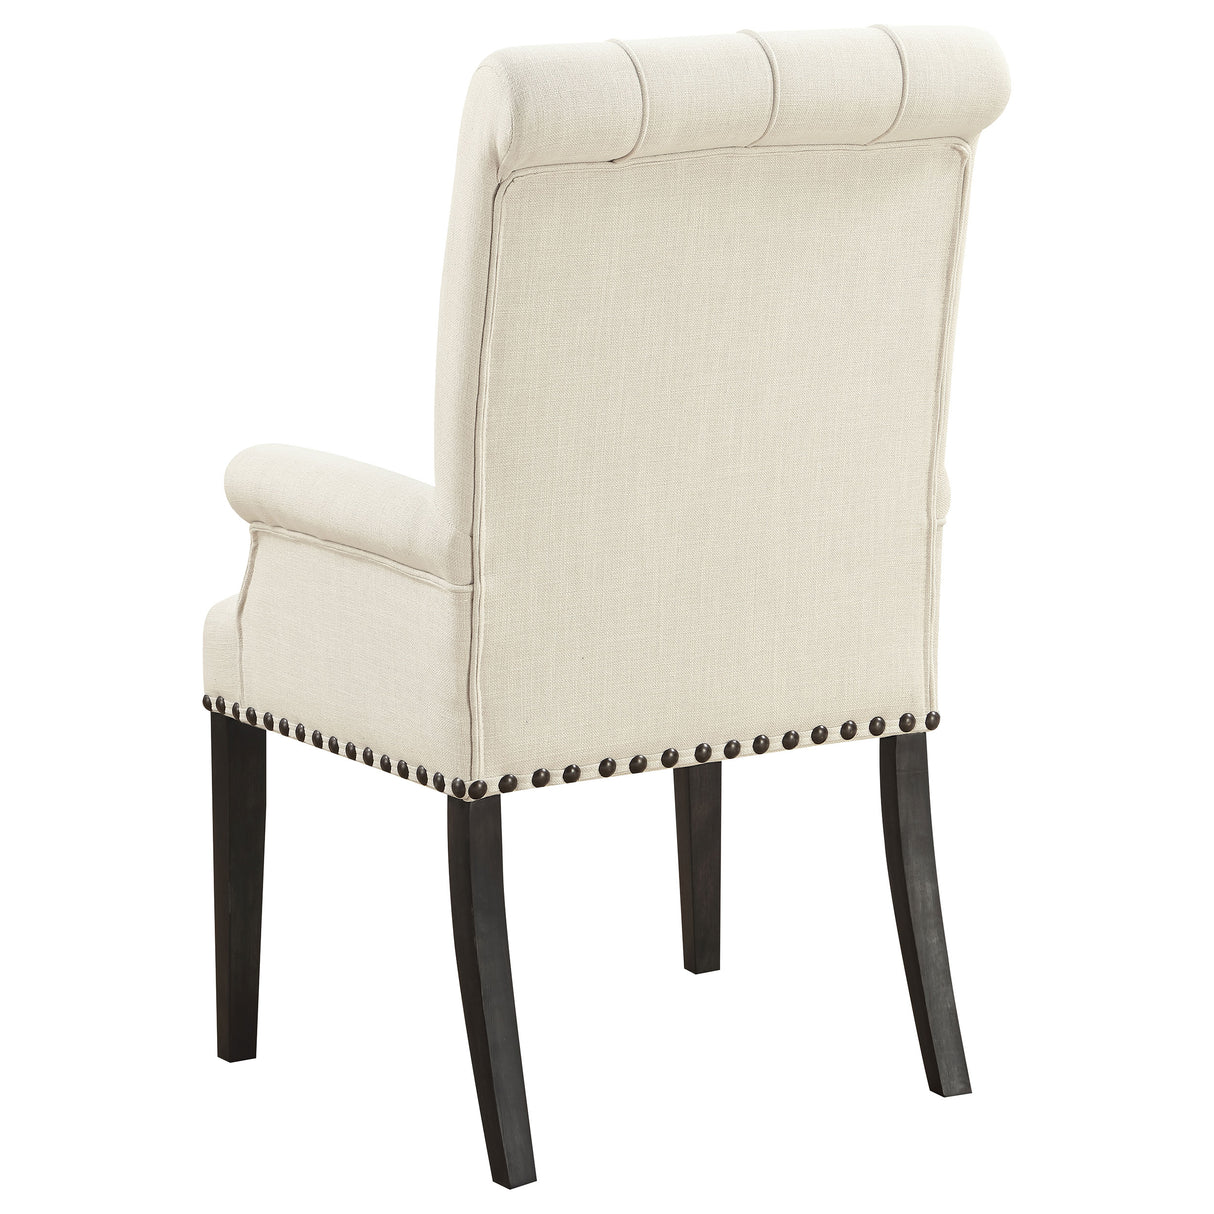 Arm Chair - Alana Upholstered Arm Chair Beige and Smokey Black